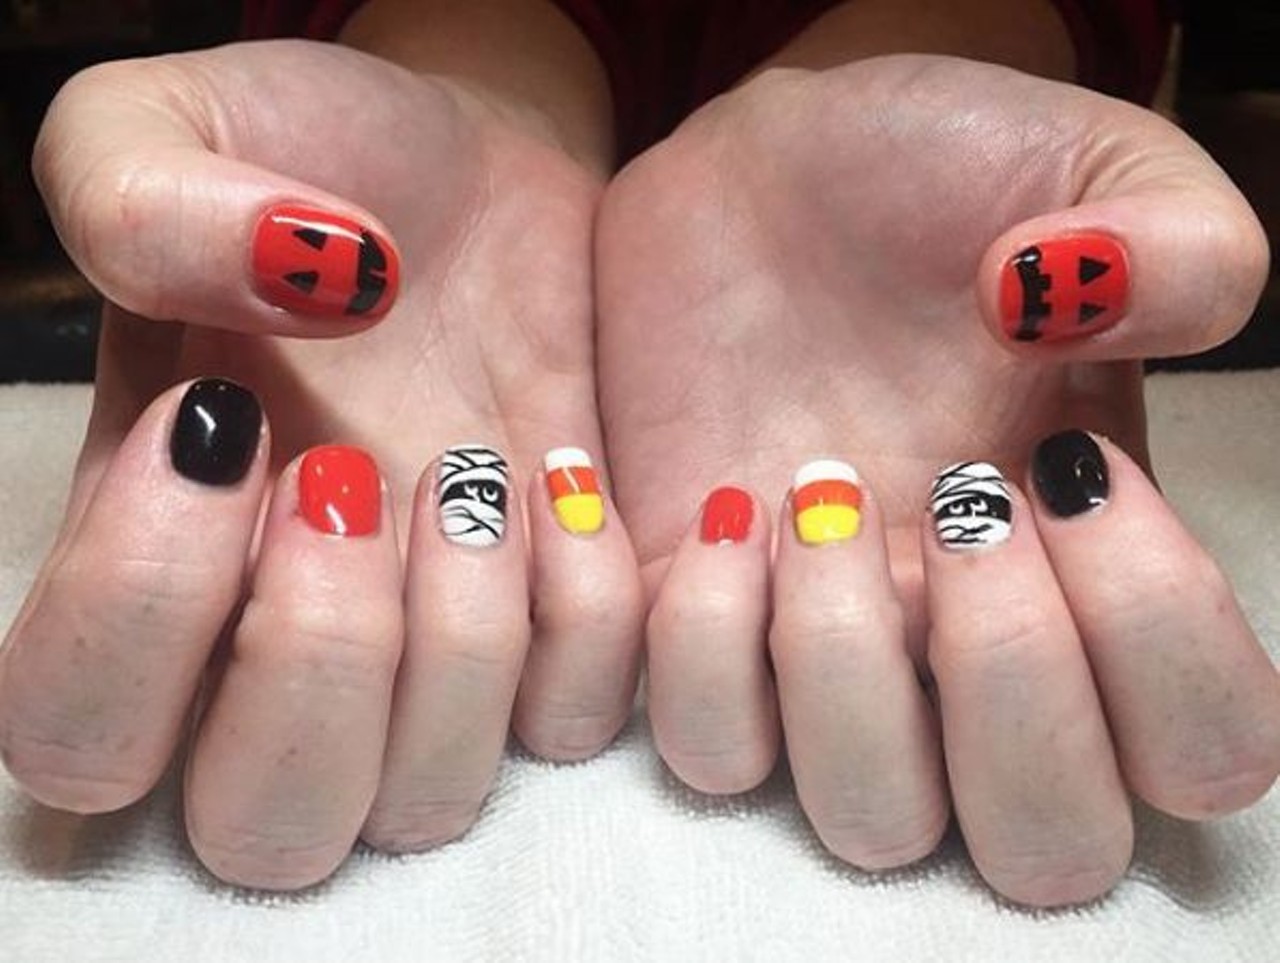  nailedbysarah
21139 Lorain Rd., Suite 10, Fairview Park | (216)672-8915 (Text only)
Co-owner of Elysian Nail Studio, Sarah Dayne can give your nails the extravagant works or a simple, bold statement. Scheduling information can be found here.
Photo via nailedbysarah/Instagram